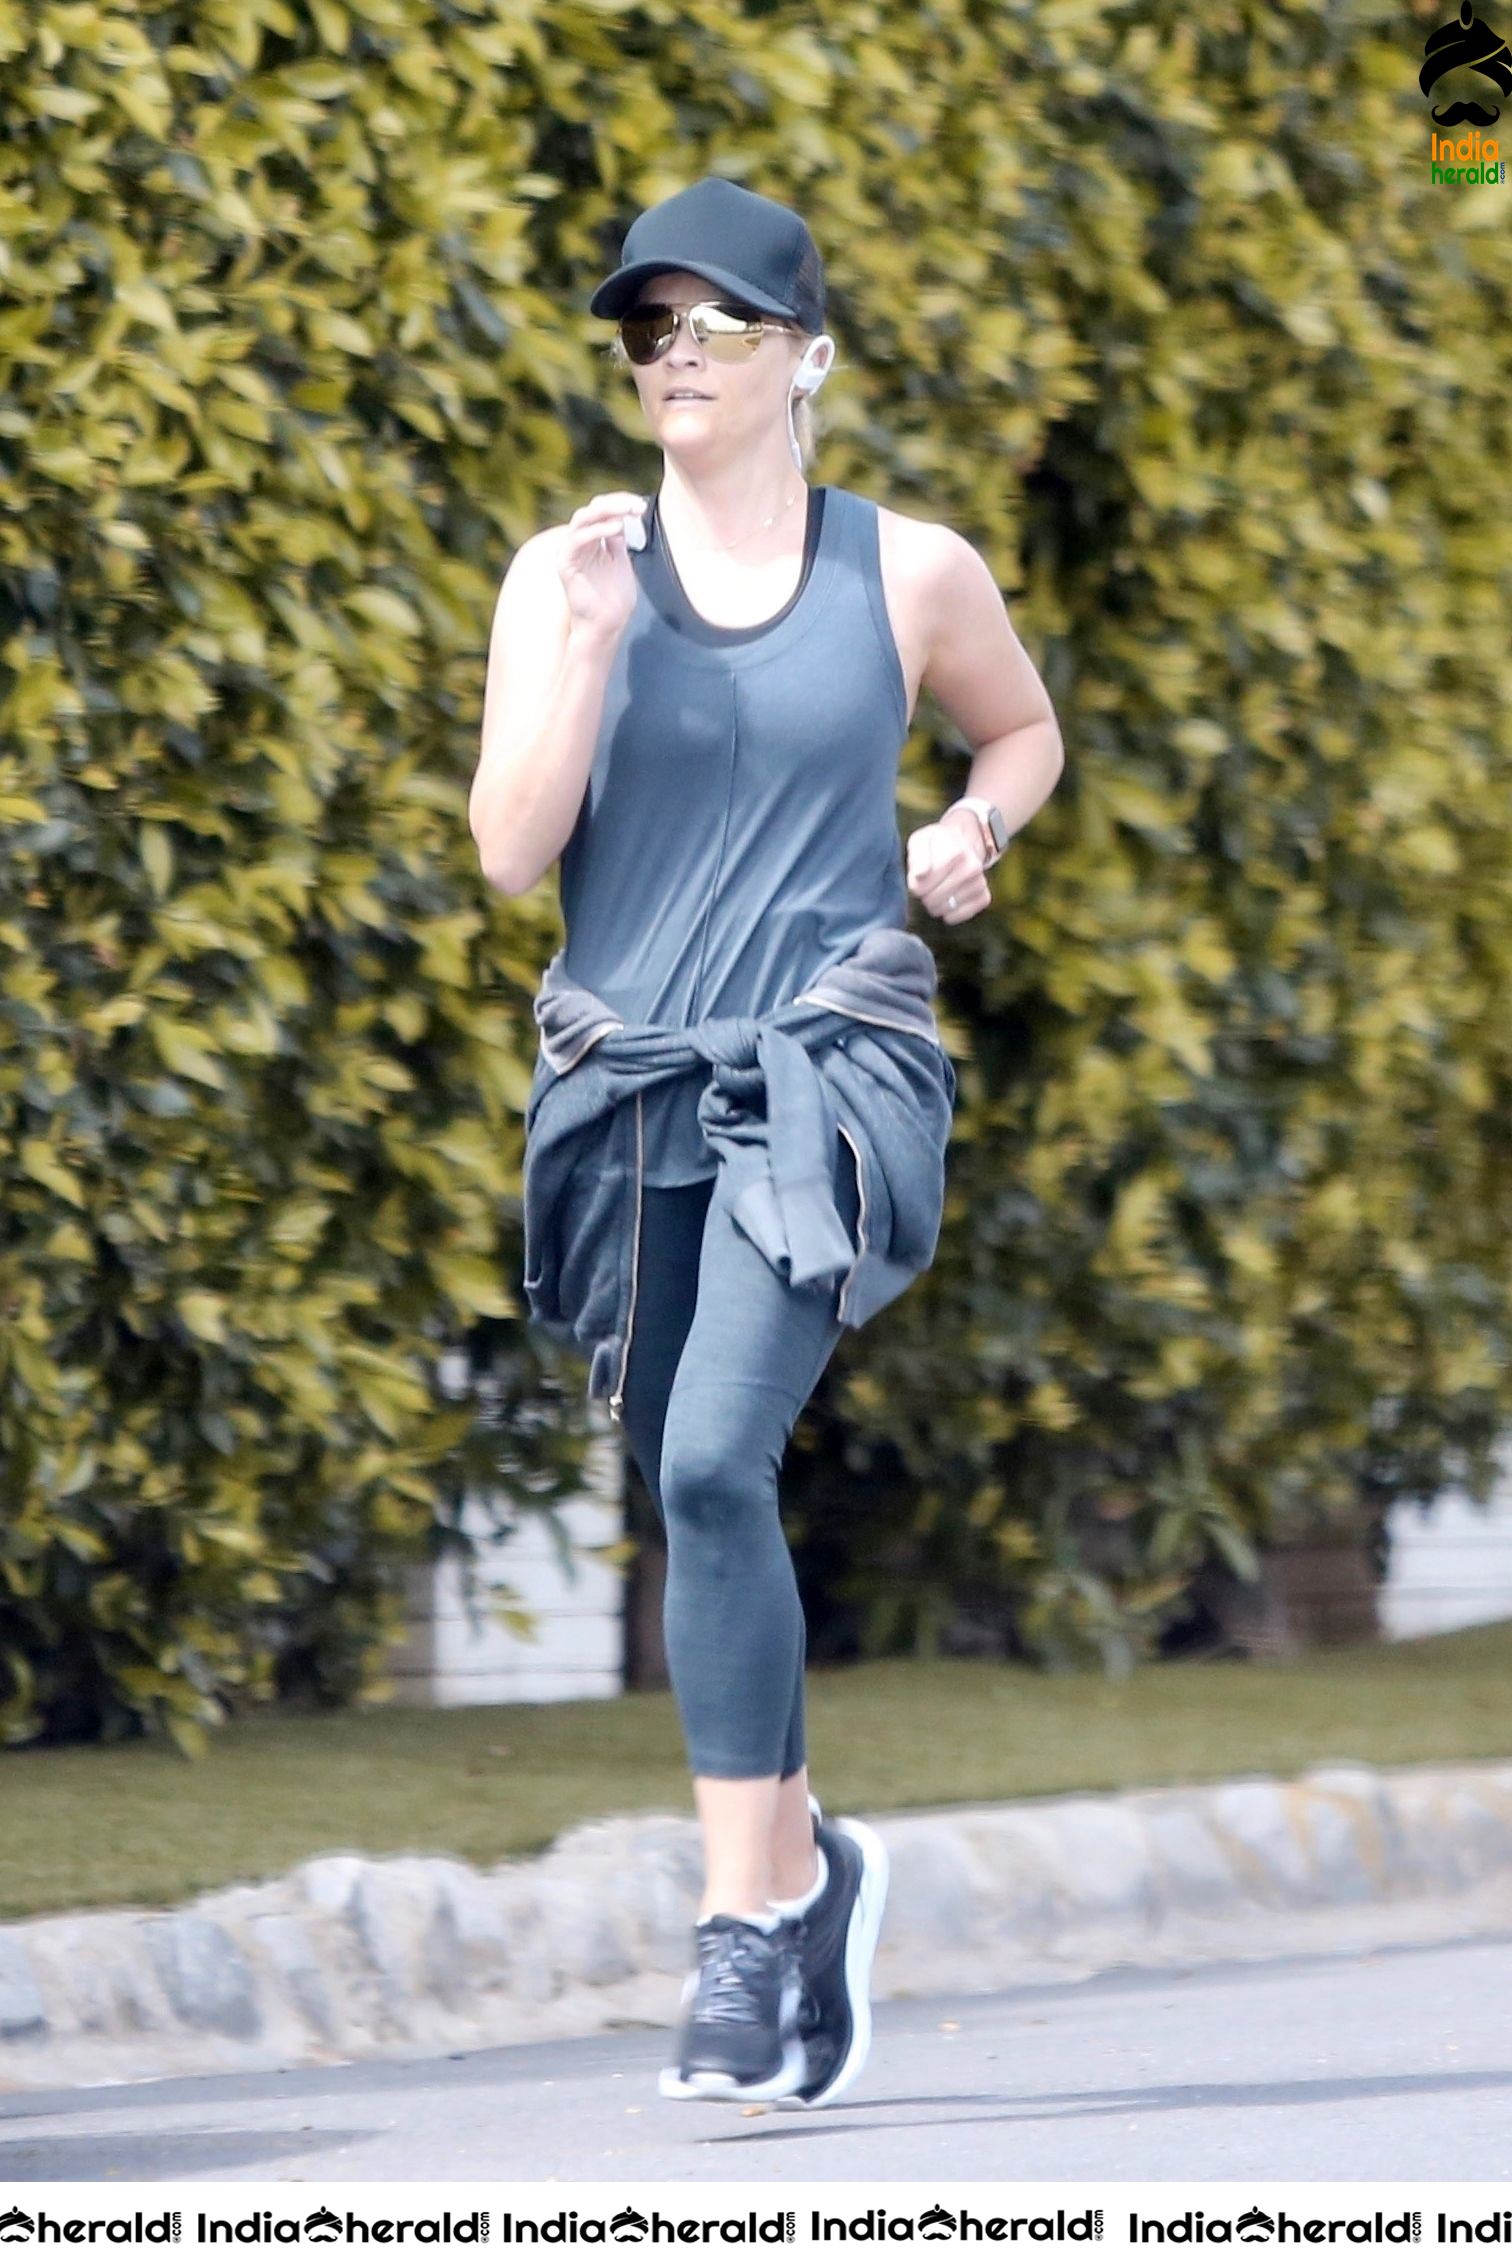 Reese Witherspoon caught by Paparazzi while jogging in Brentwood